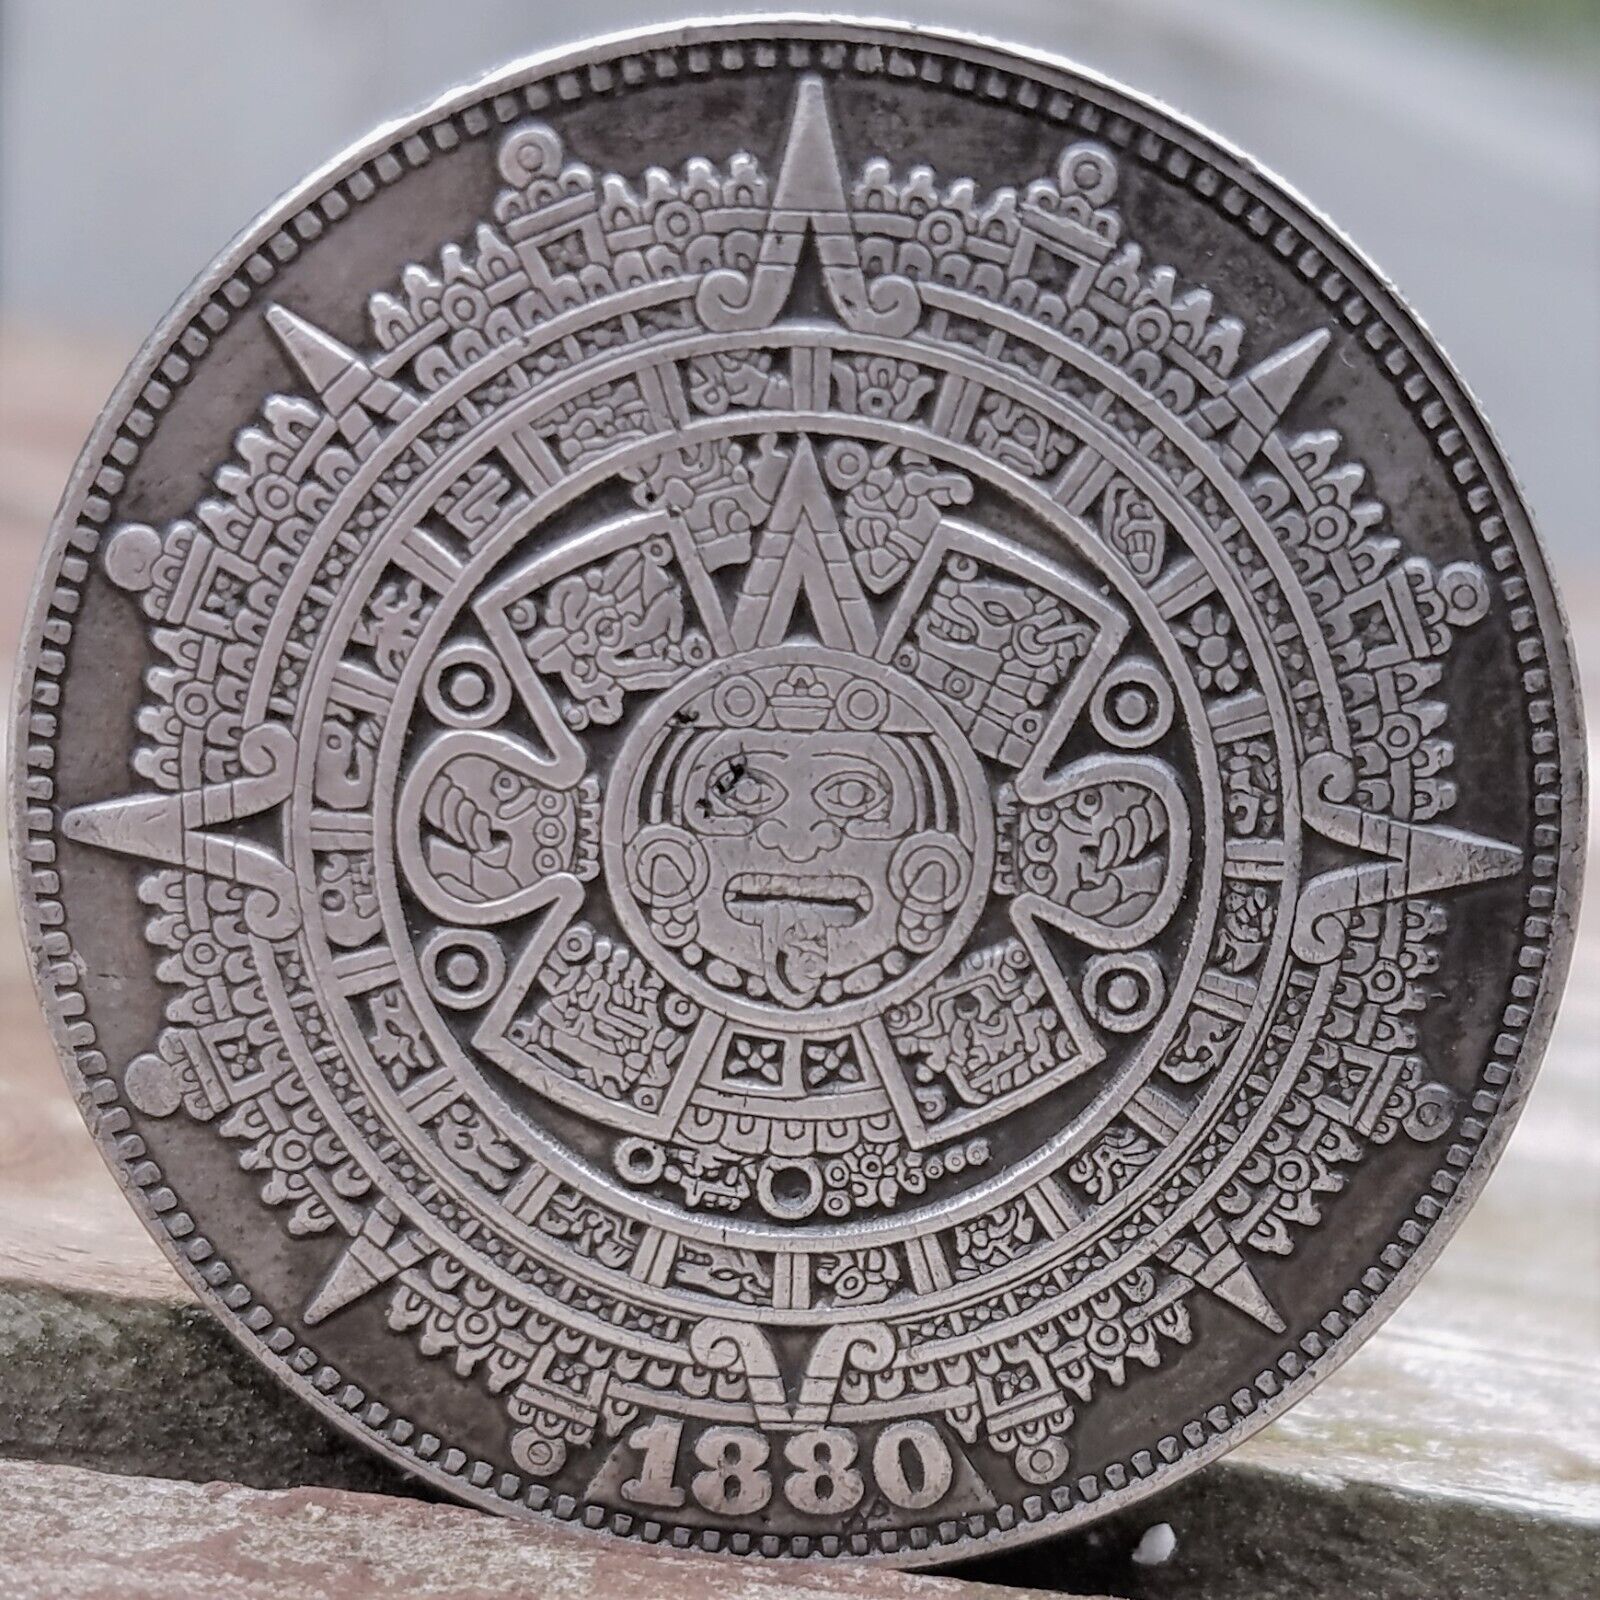 1880 Aztec Calendar Art Coin with Protective Capsule and Display Stand